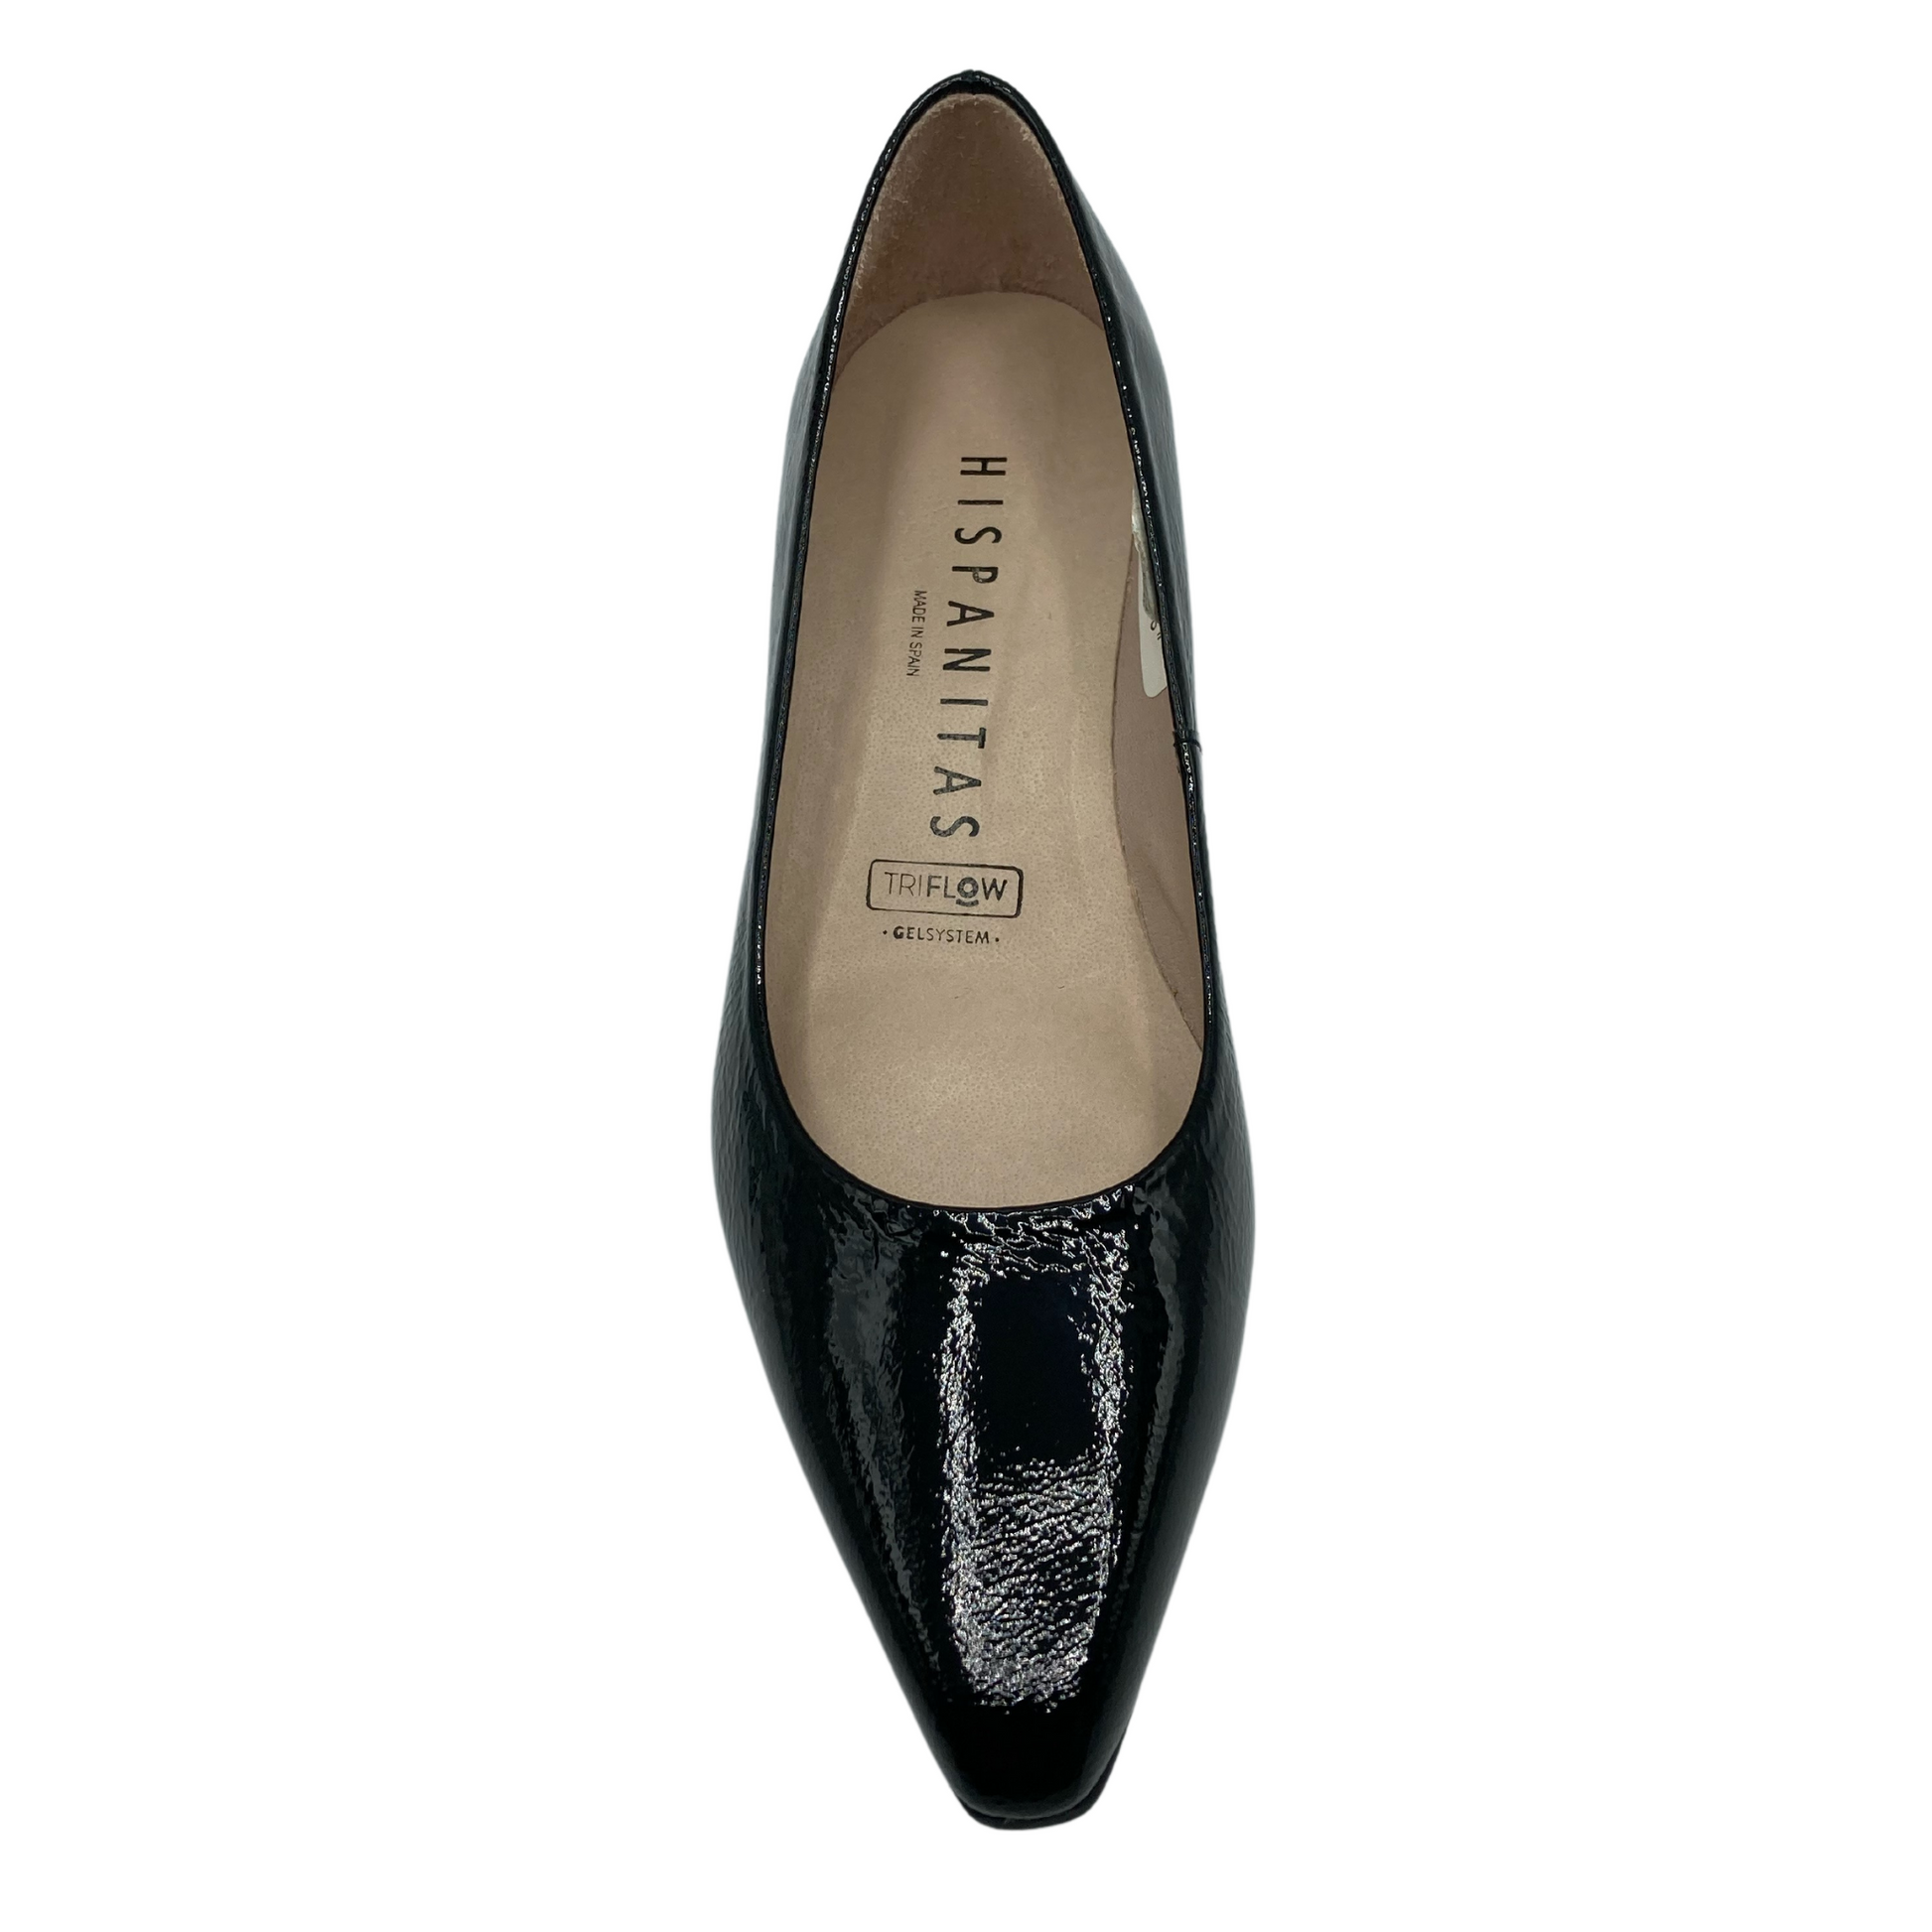 Top view of black patent leather pump with pointed toe